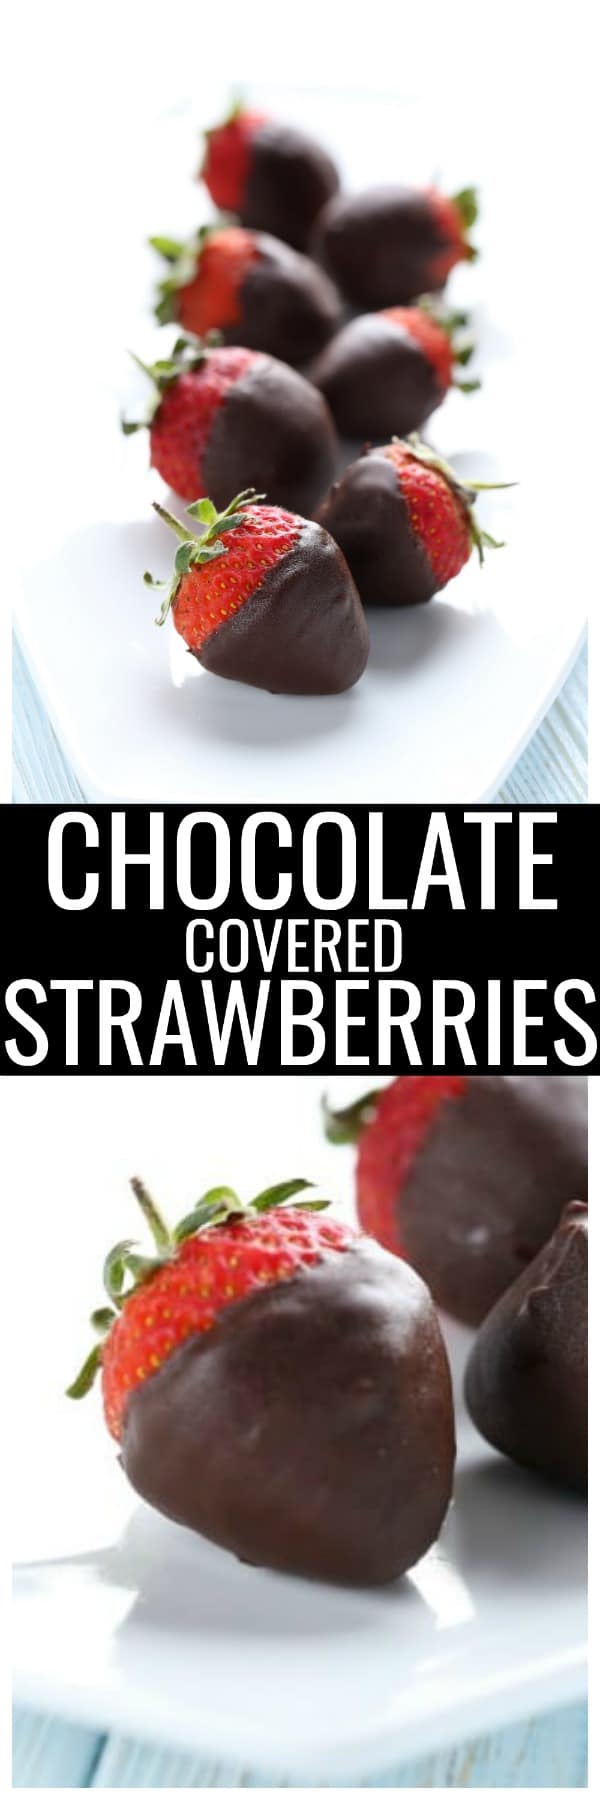 Every great hostess should know how to make chocolate covered strawberries. This easy chocolate covered strawberries recipe comes together in just minutes and always impresses guests. Or, make these Valentine's Day chocolate covered strawberry as a romantic dessert for someone special.